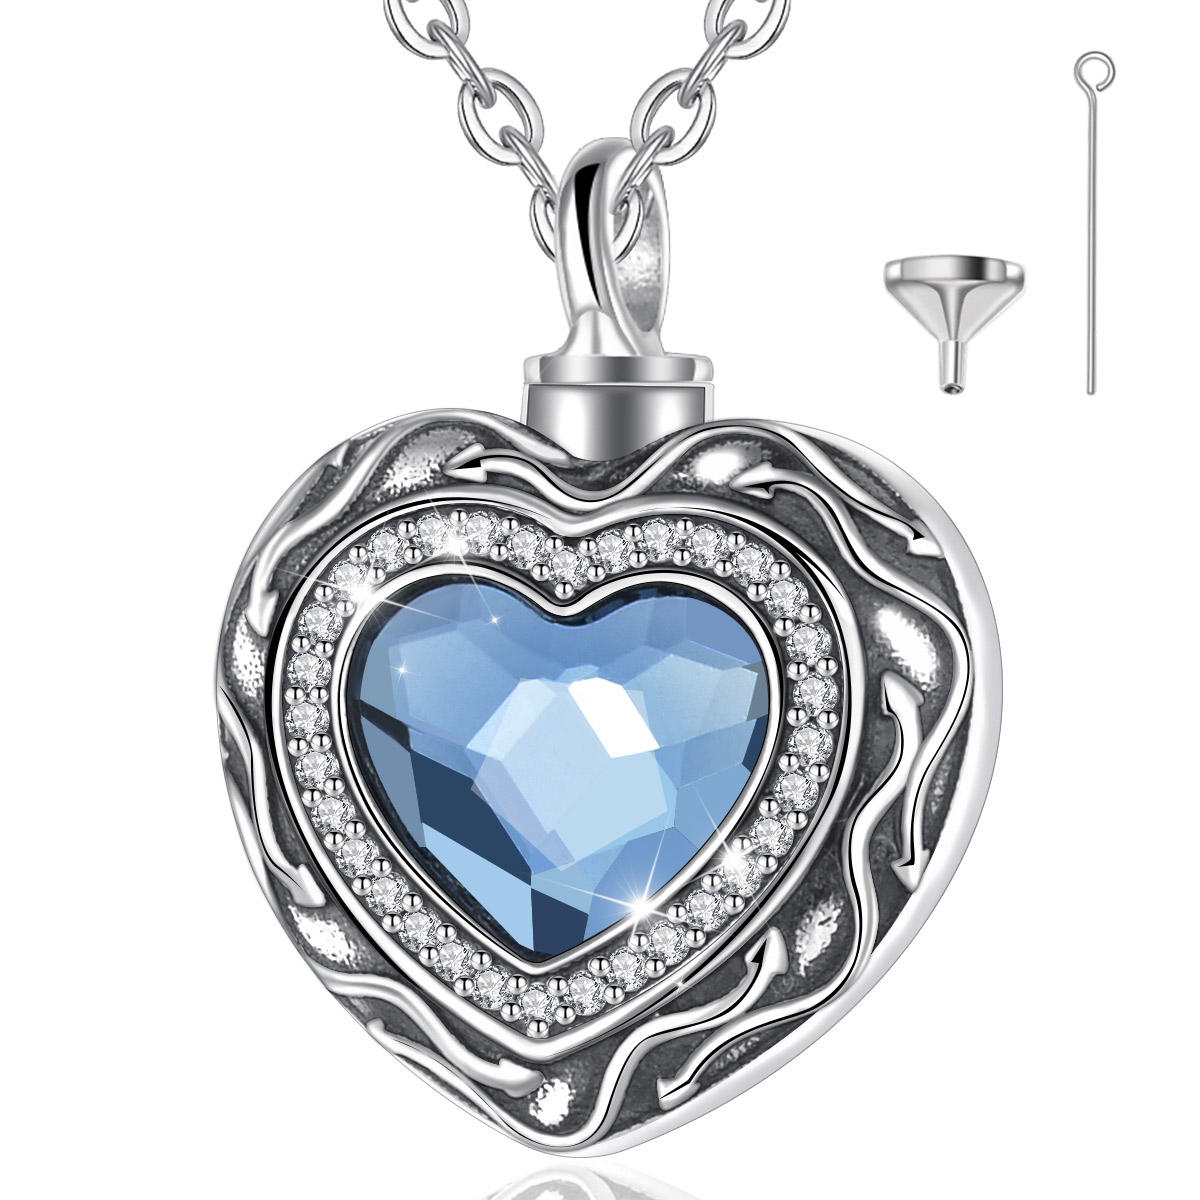 Merryshine Jewelry 925 Sterling Silver Crystal Heart Ashes Cremation ...